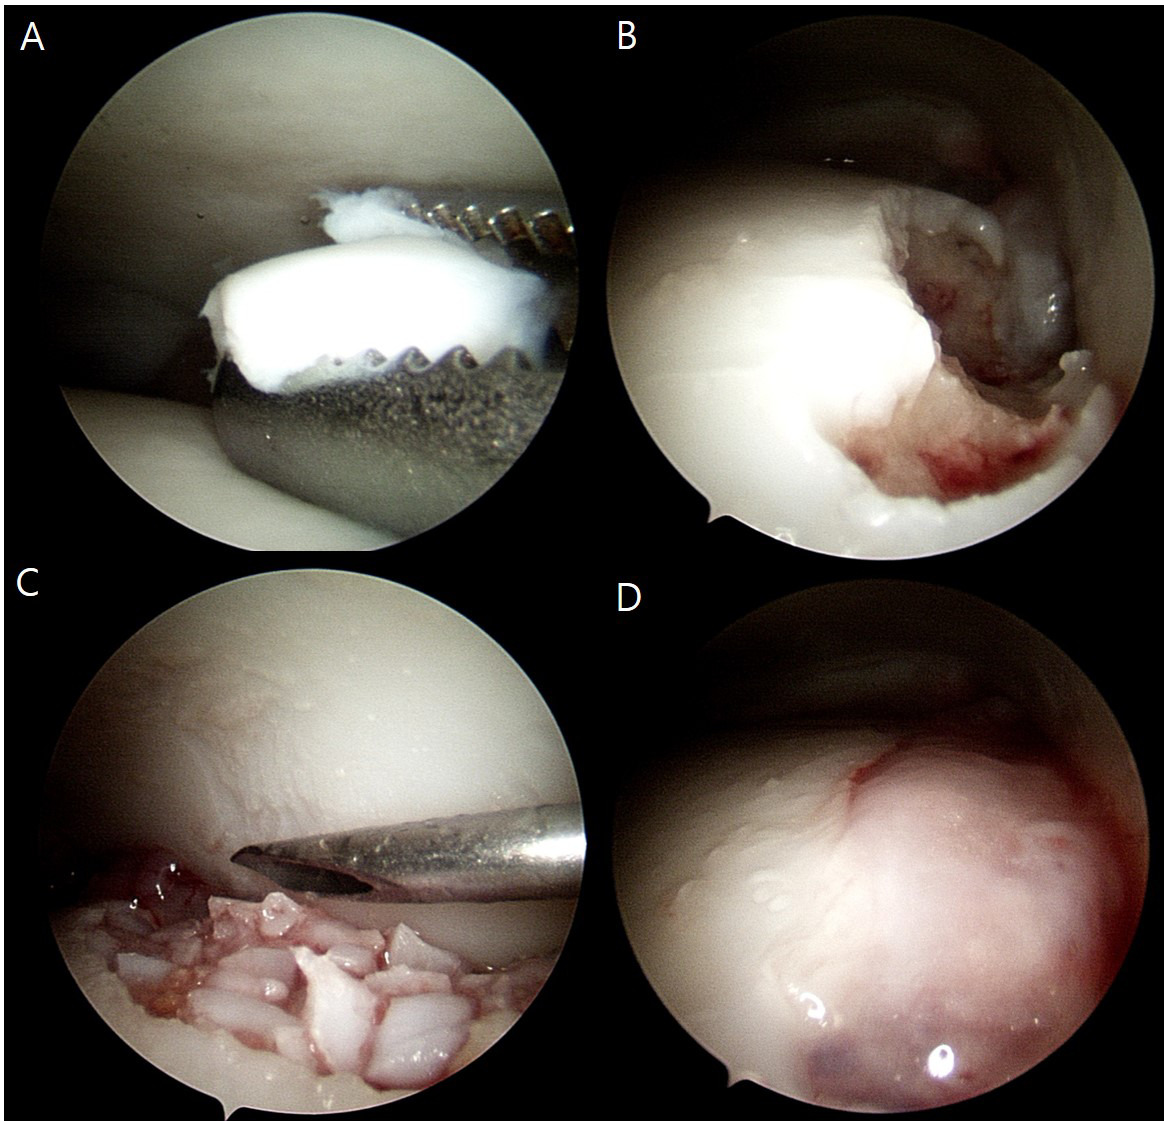 Fig. 1 
            a) Detached cartilage of the osteochondral lesion was harvested using a grasper. b) Subchondral bone defect was curetted and microfracture was performed to create a sufficient bleeding surface. c) After saline drainage, under direct visualization using a dry-scope, the particulated cartilages were transplanted to fill the lesion. d) Fibrin glue was applied over the cartilage fragments for stabilization.
          